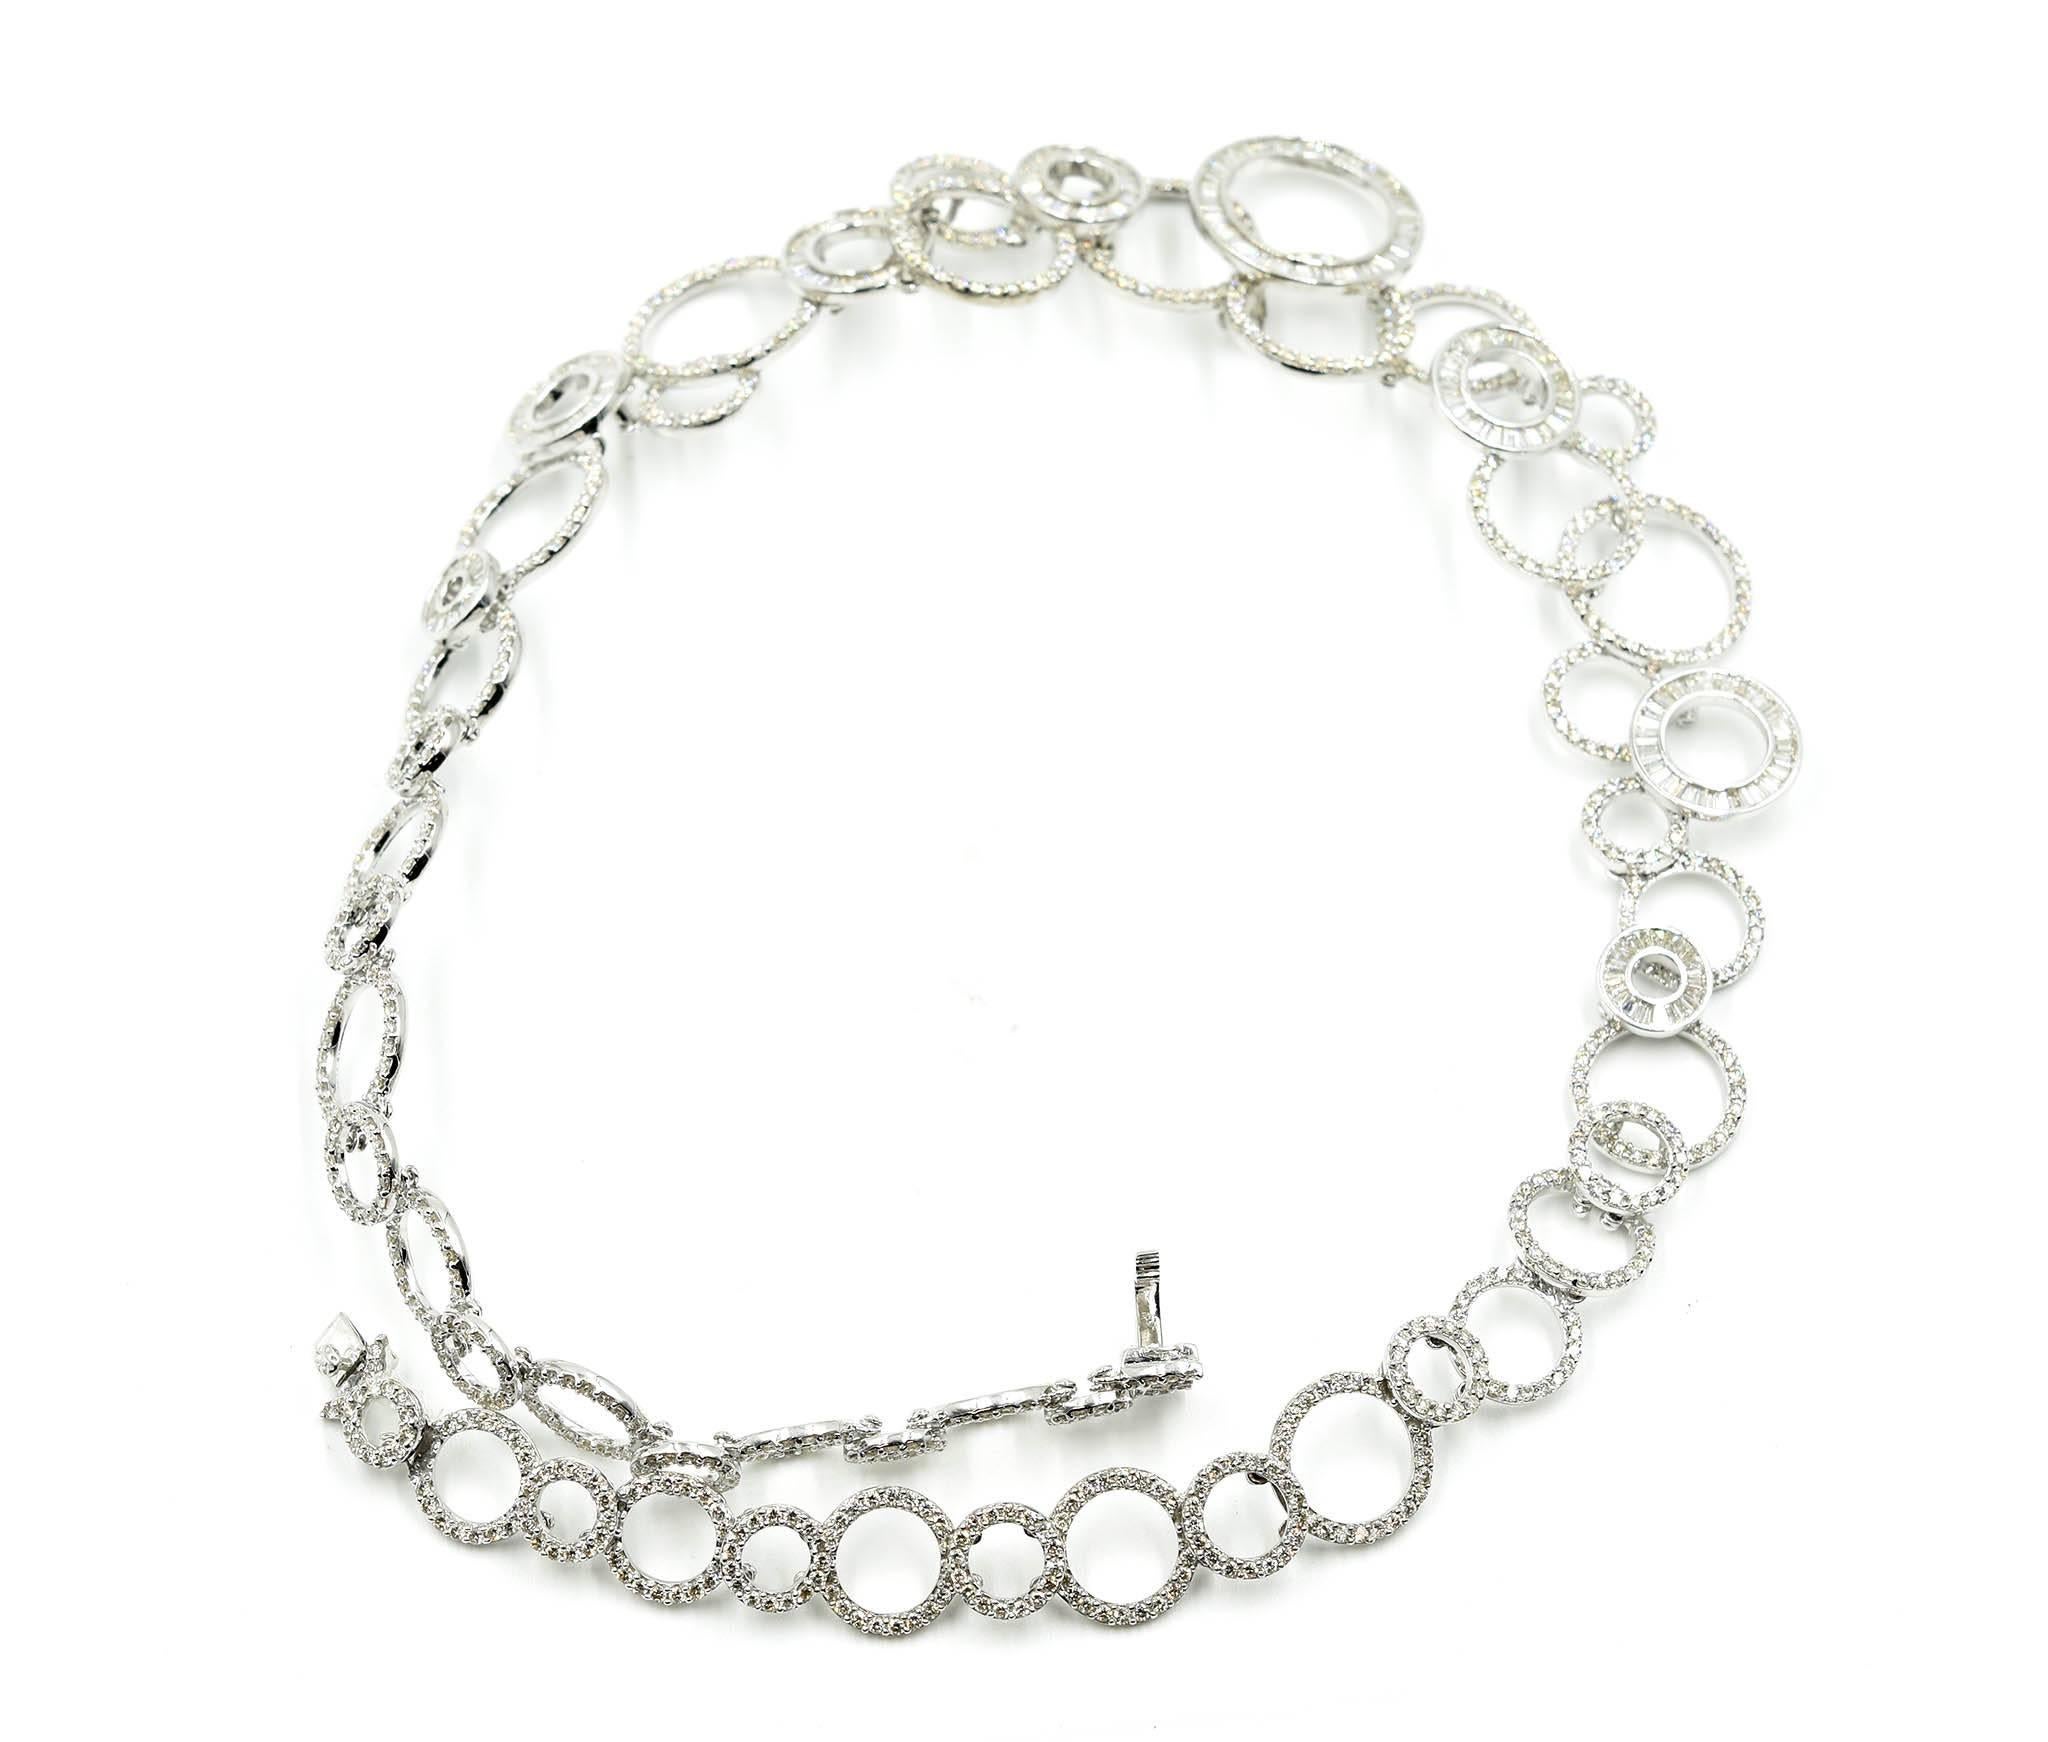 Modern 18k White Gold, 13.44cttw Round and Baguette Diamond Circle Link Necklace